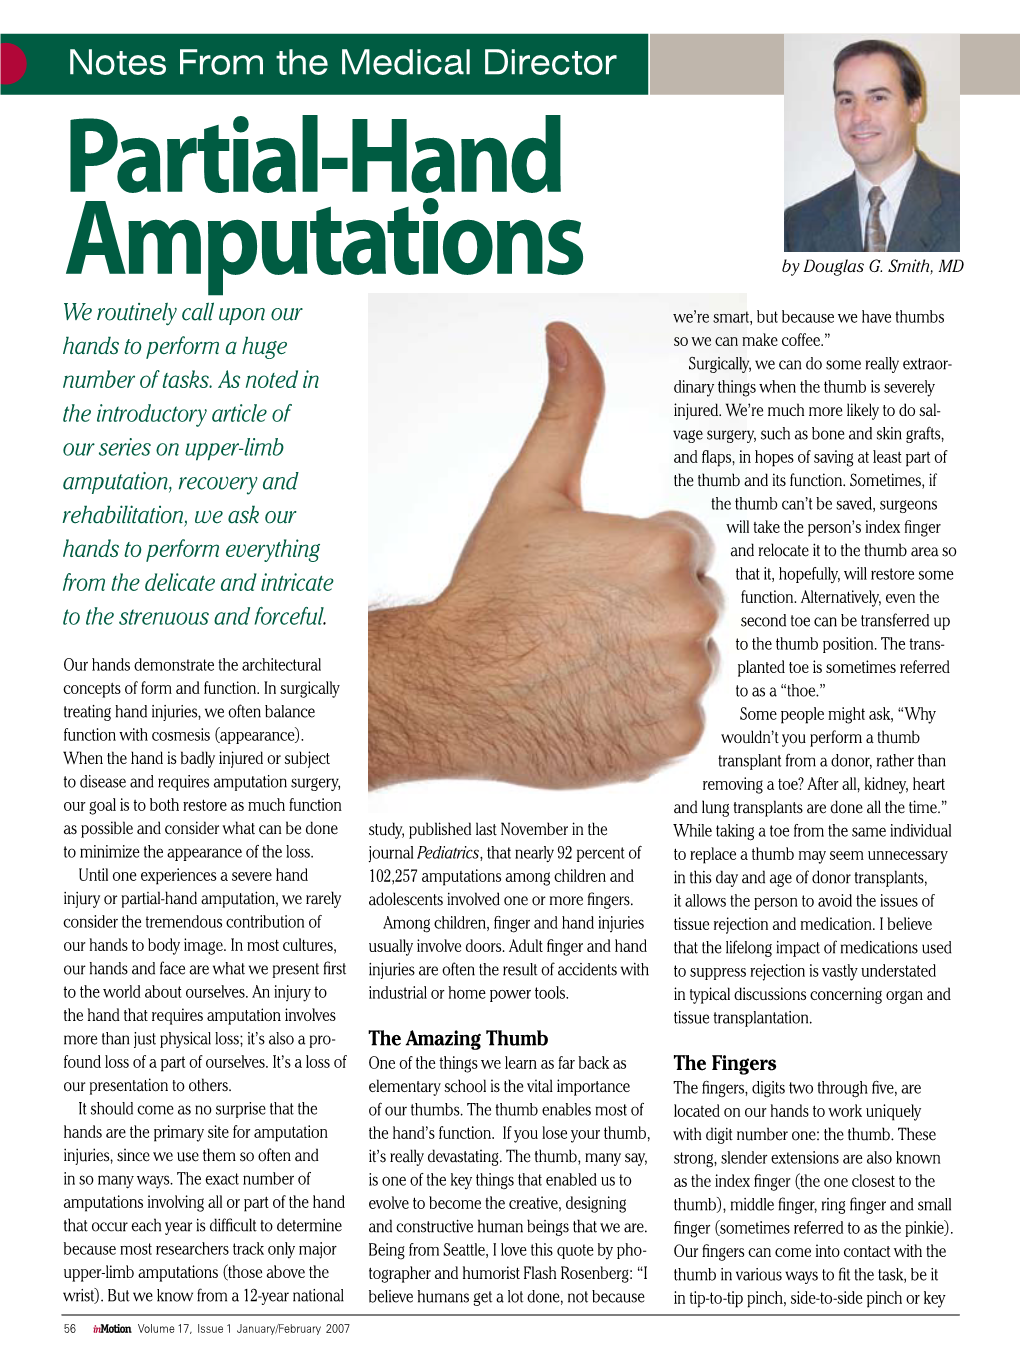 Partial-Hand Amputations by Douglas G